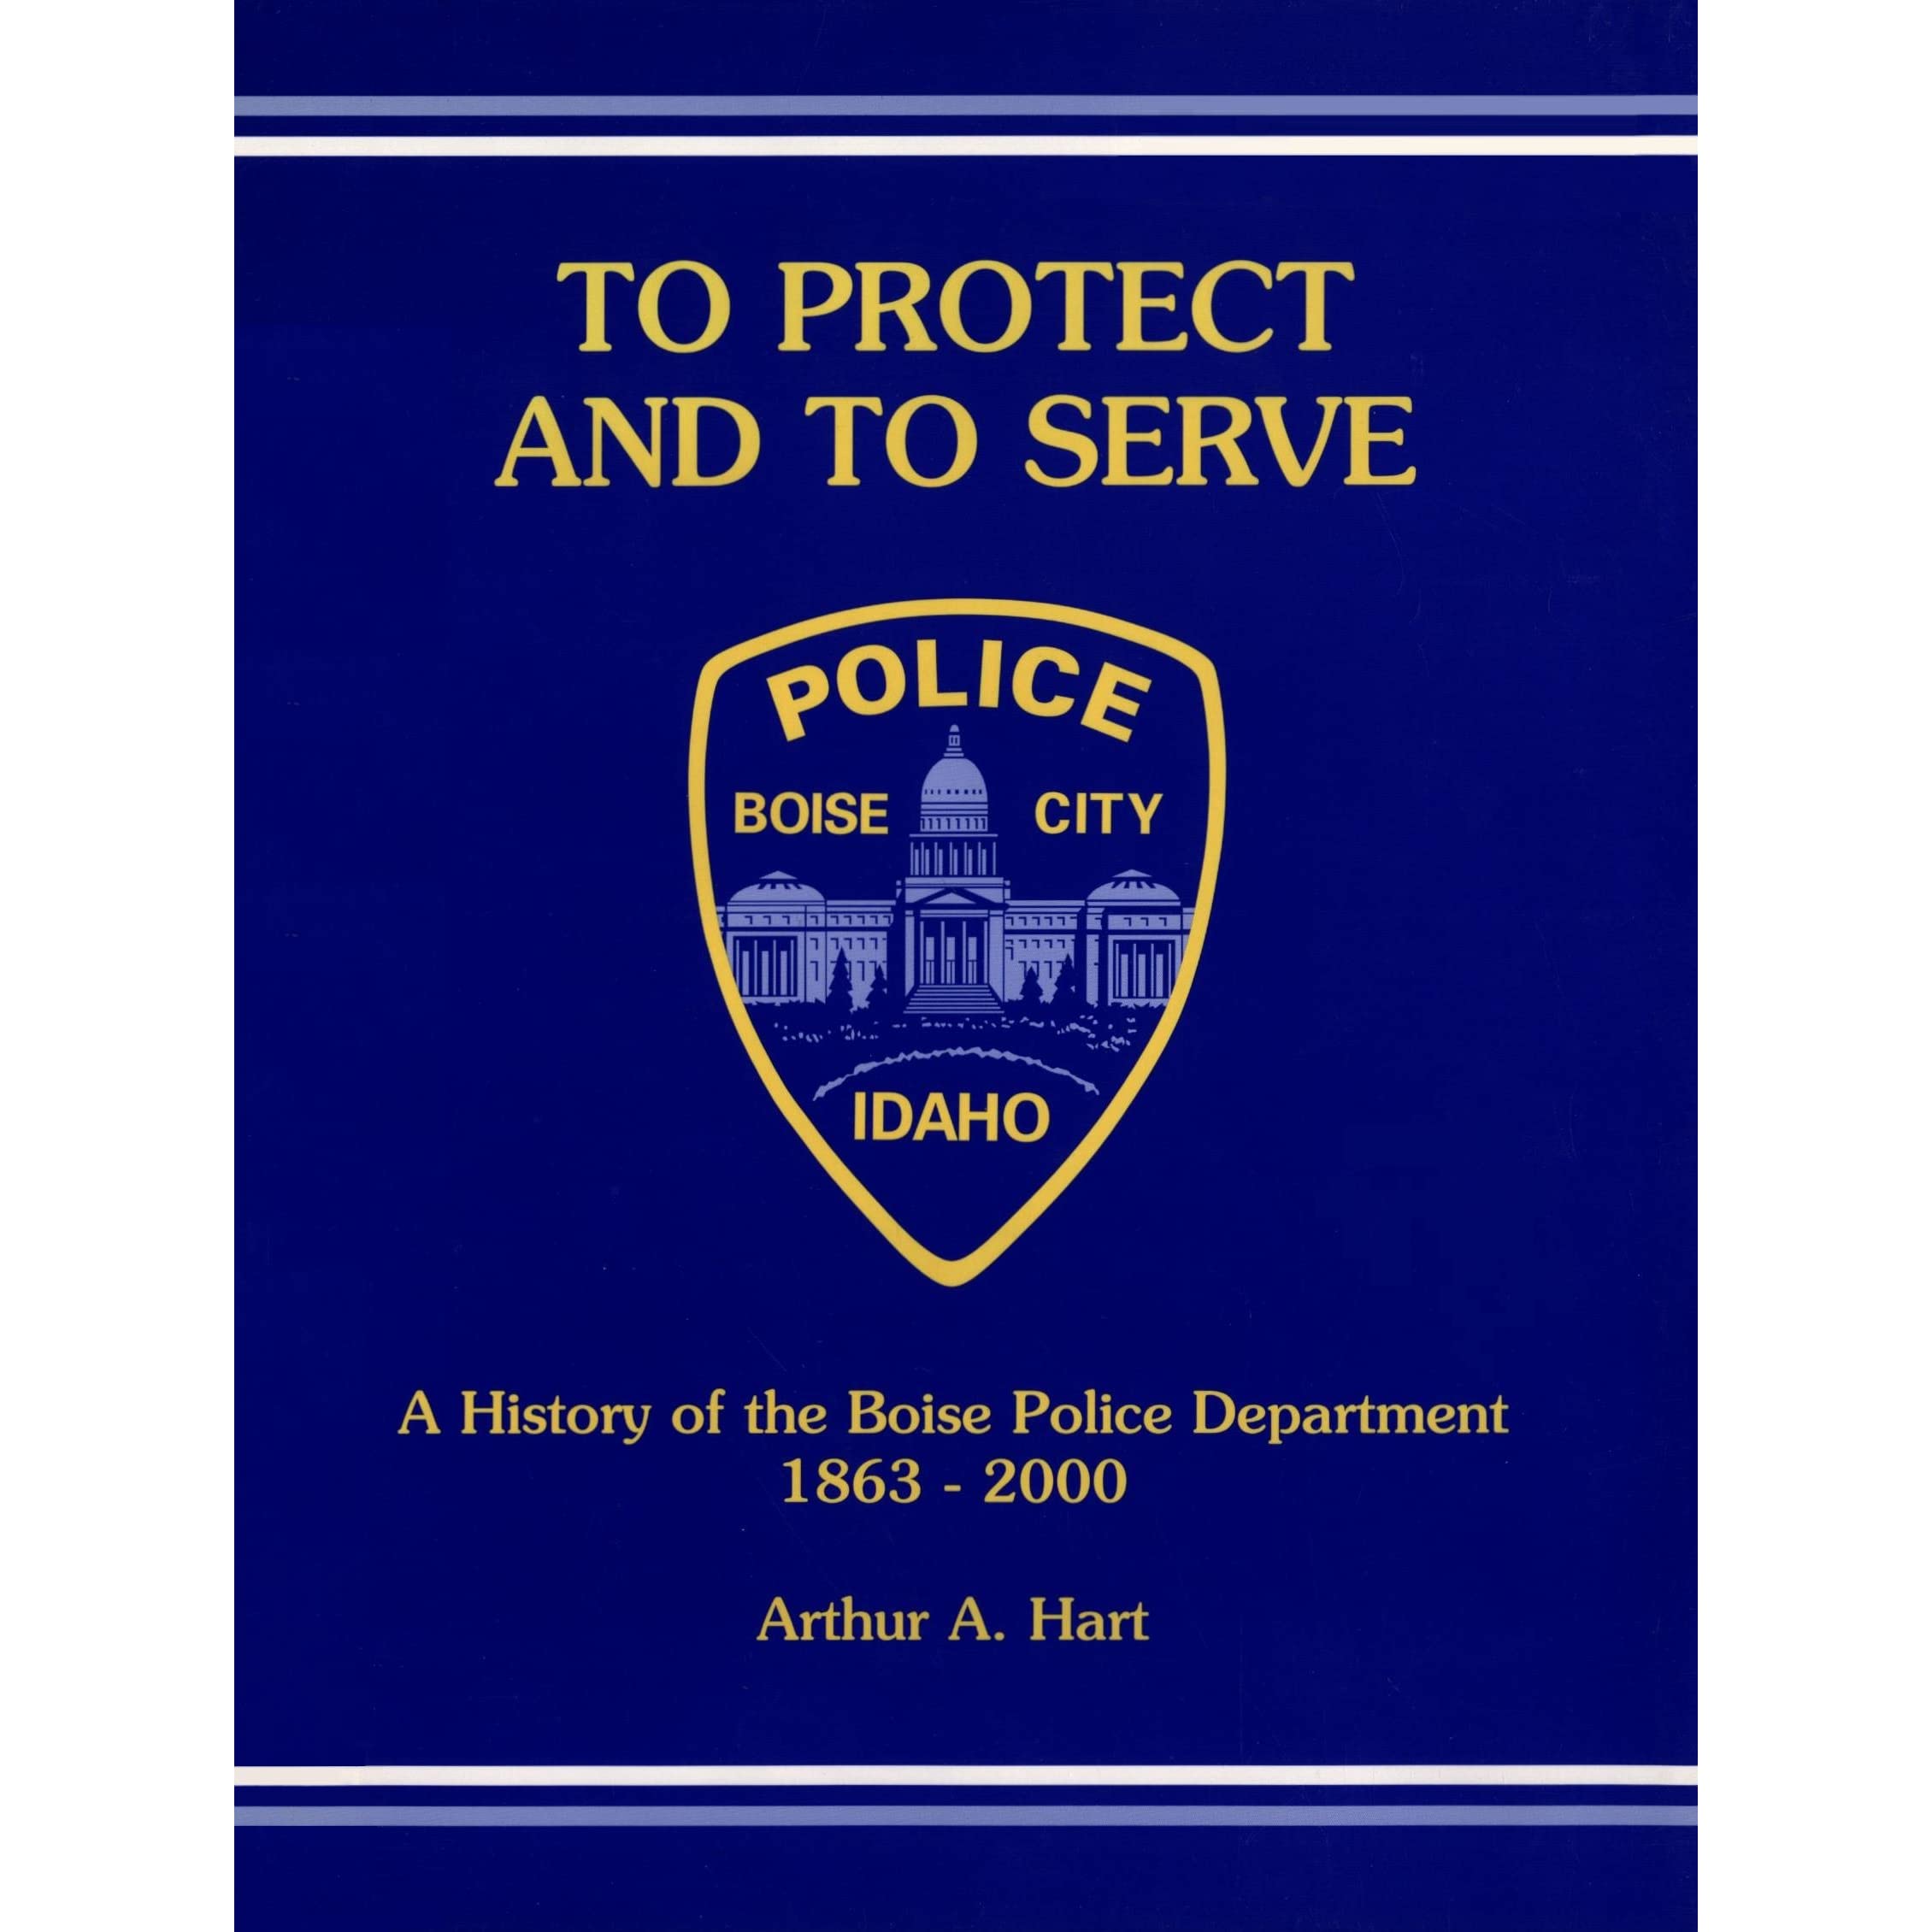 To protect and to serve: A history of the Boise Police Department, 1863-2000 (book cover)